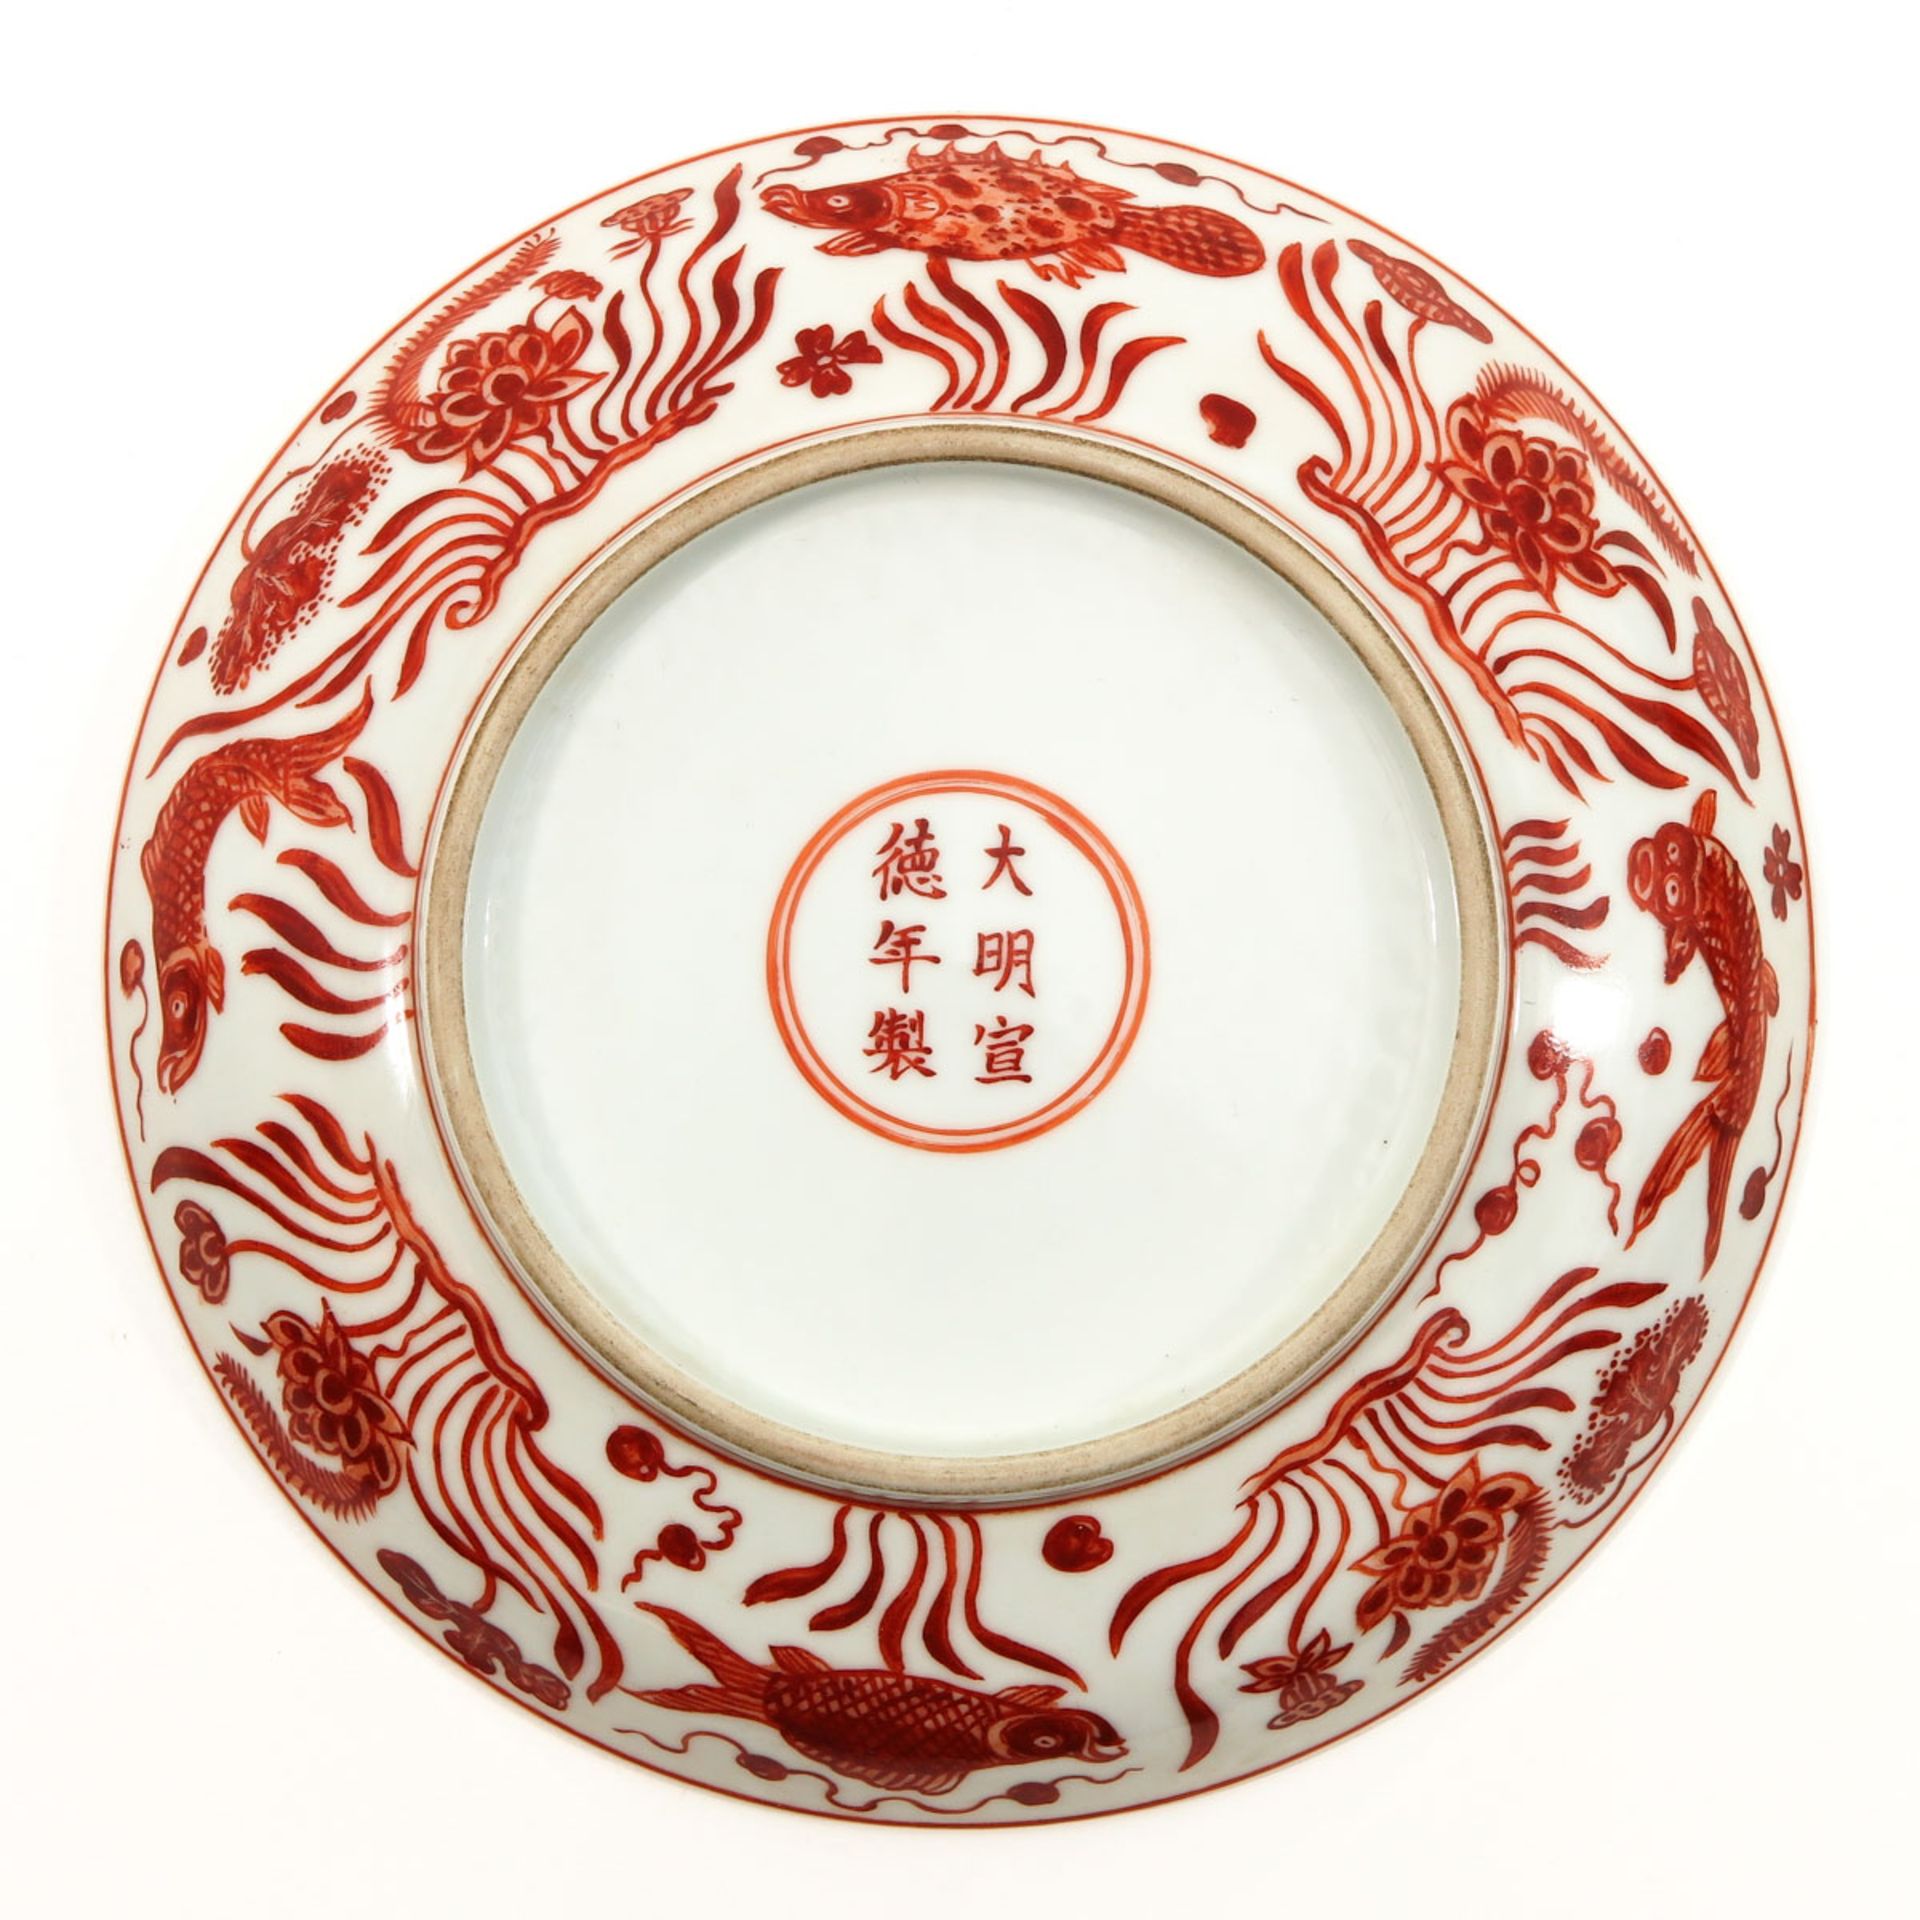 An Iron Red Decor Plate - Image 2 of 6